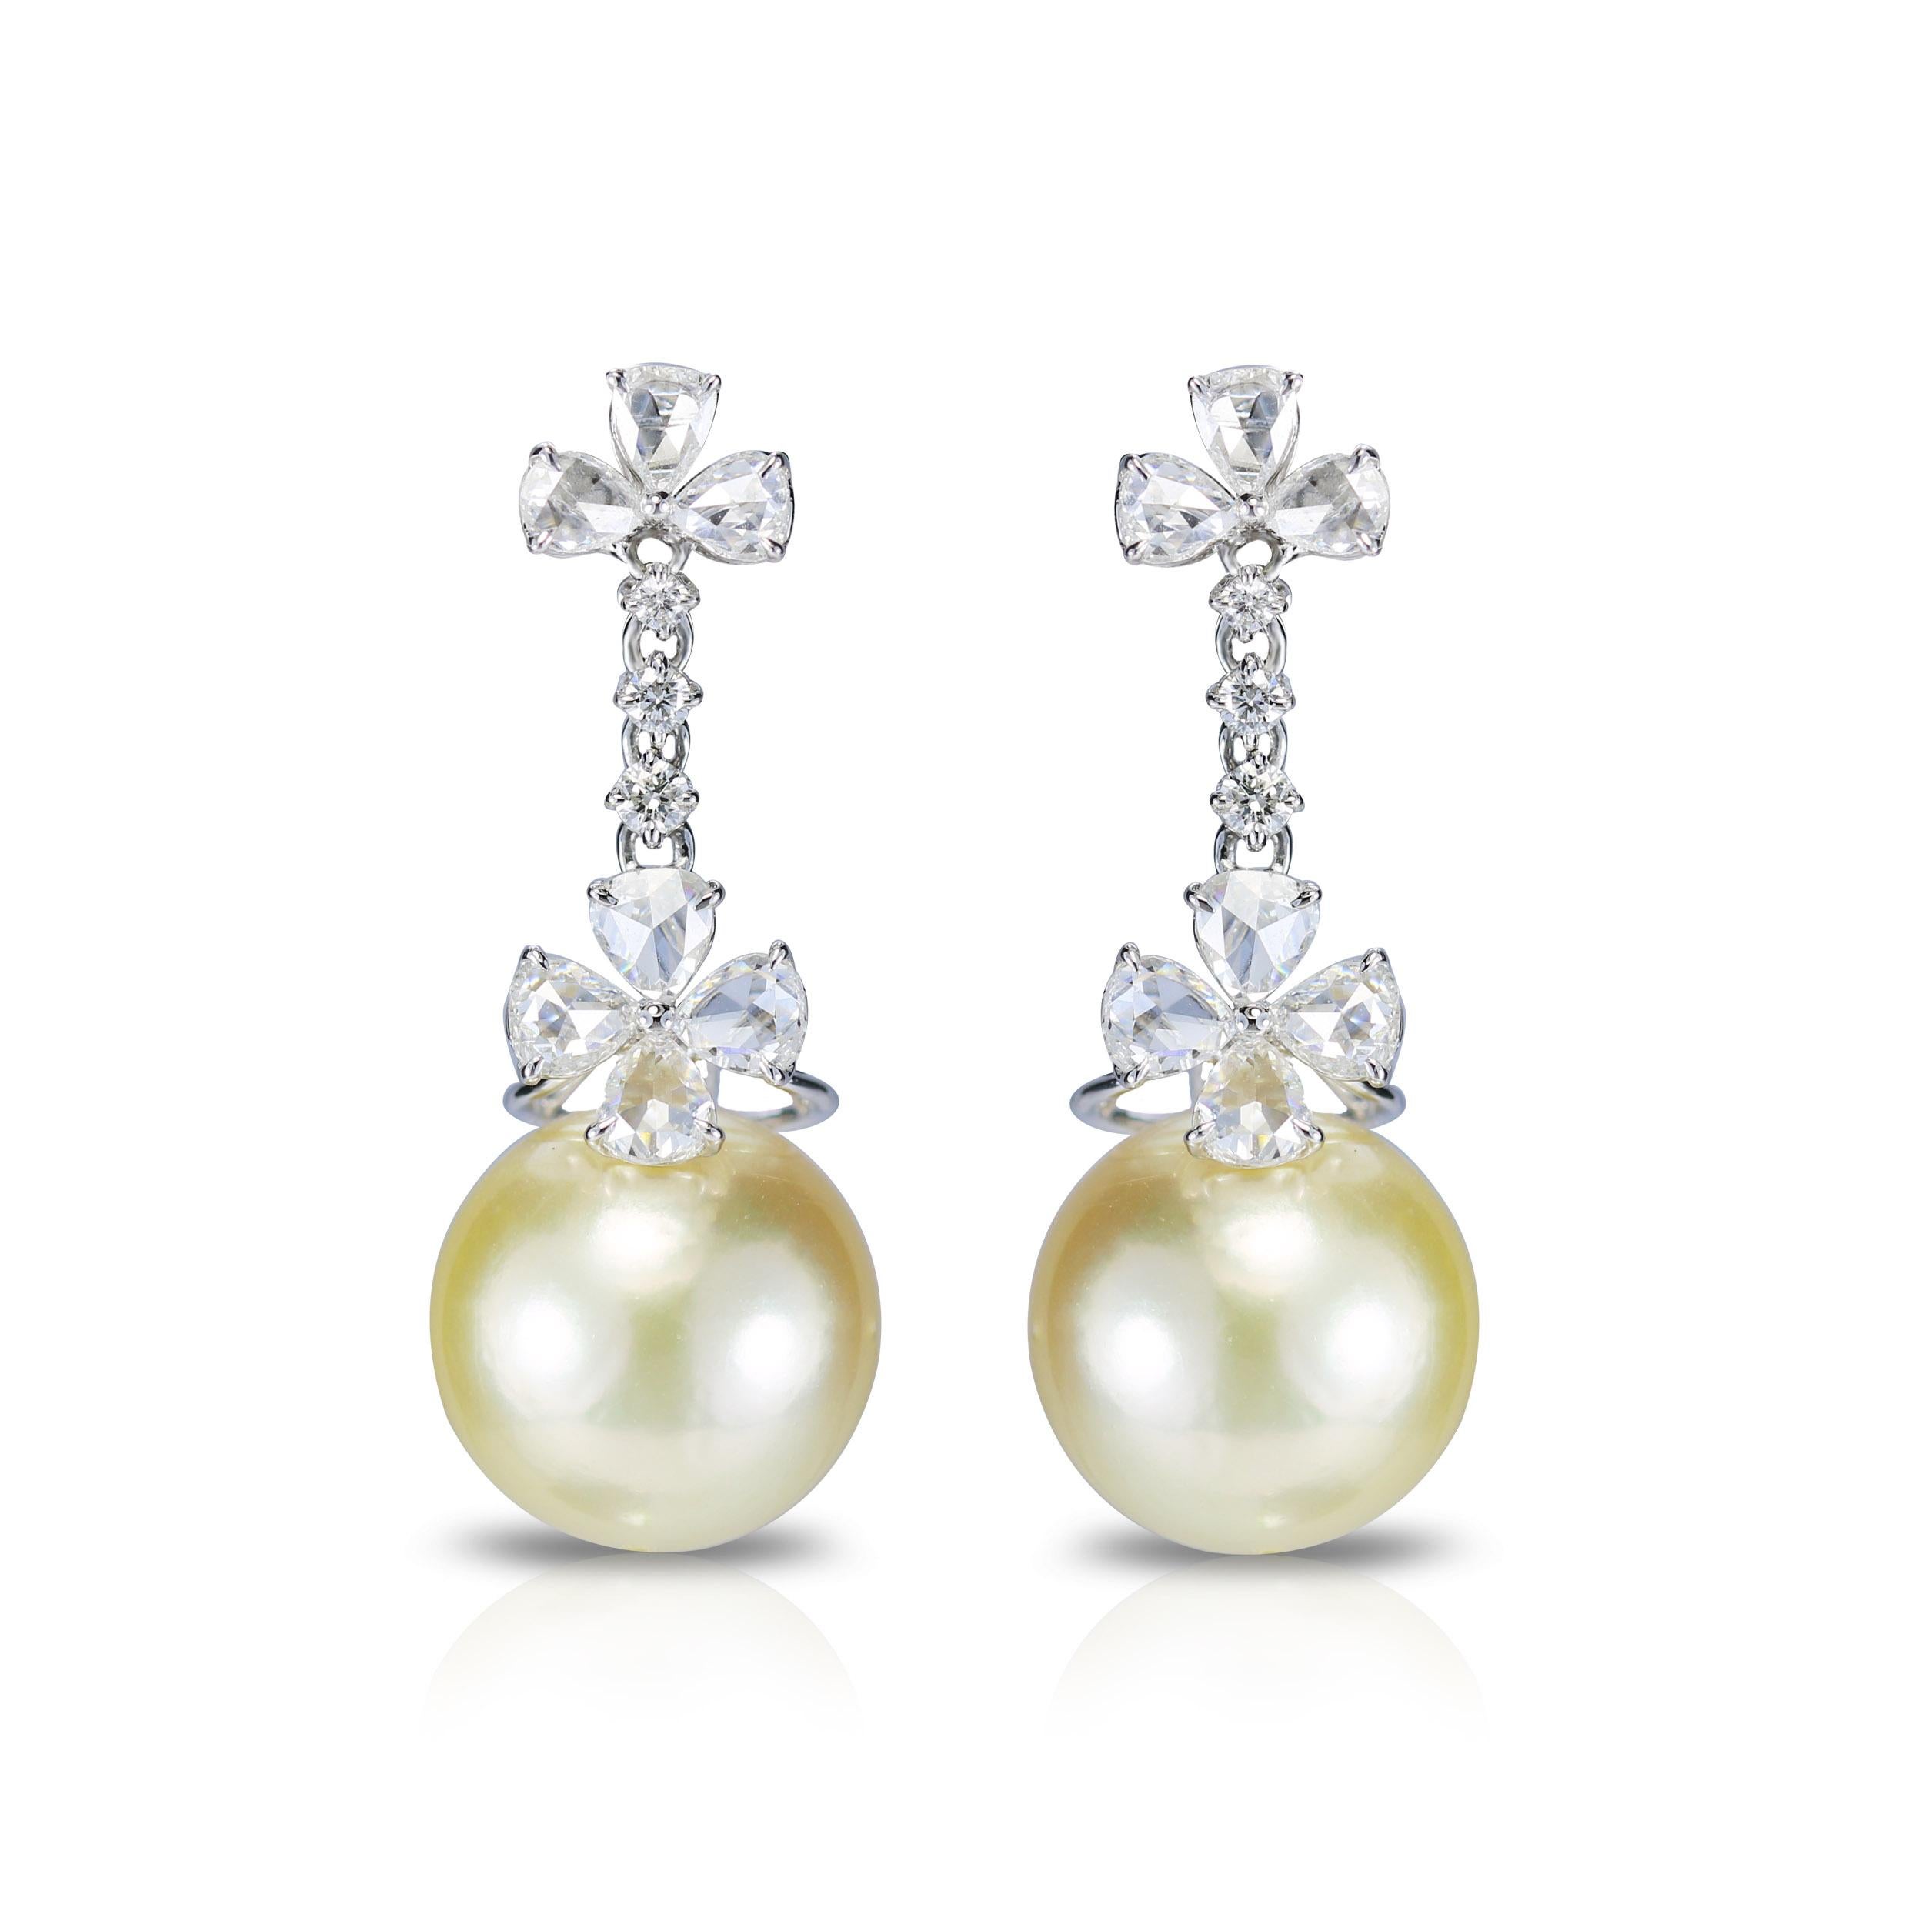 Studio Rêves Pear Rose Cut Diamonds and South Sea Pearl Earrings in 18K Gold In New Condition For Sale In Mumbai, Maharashtra